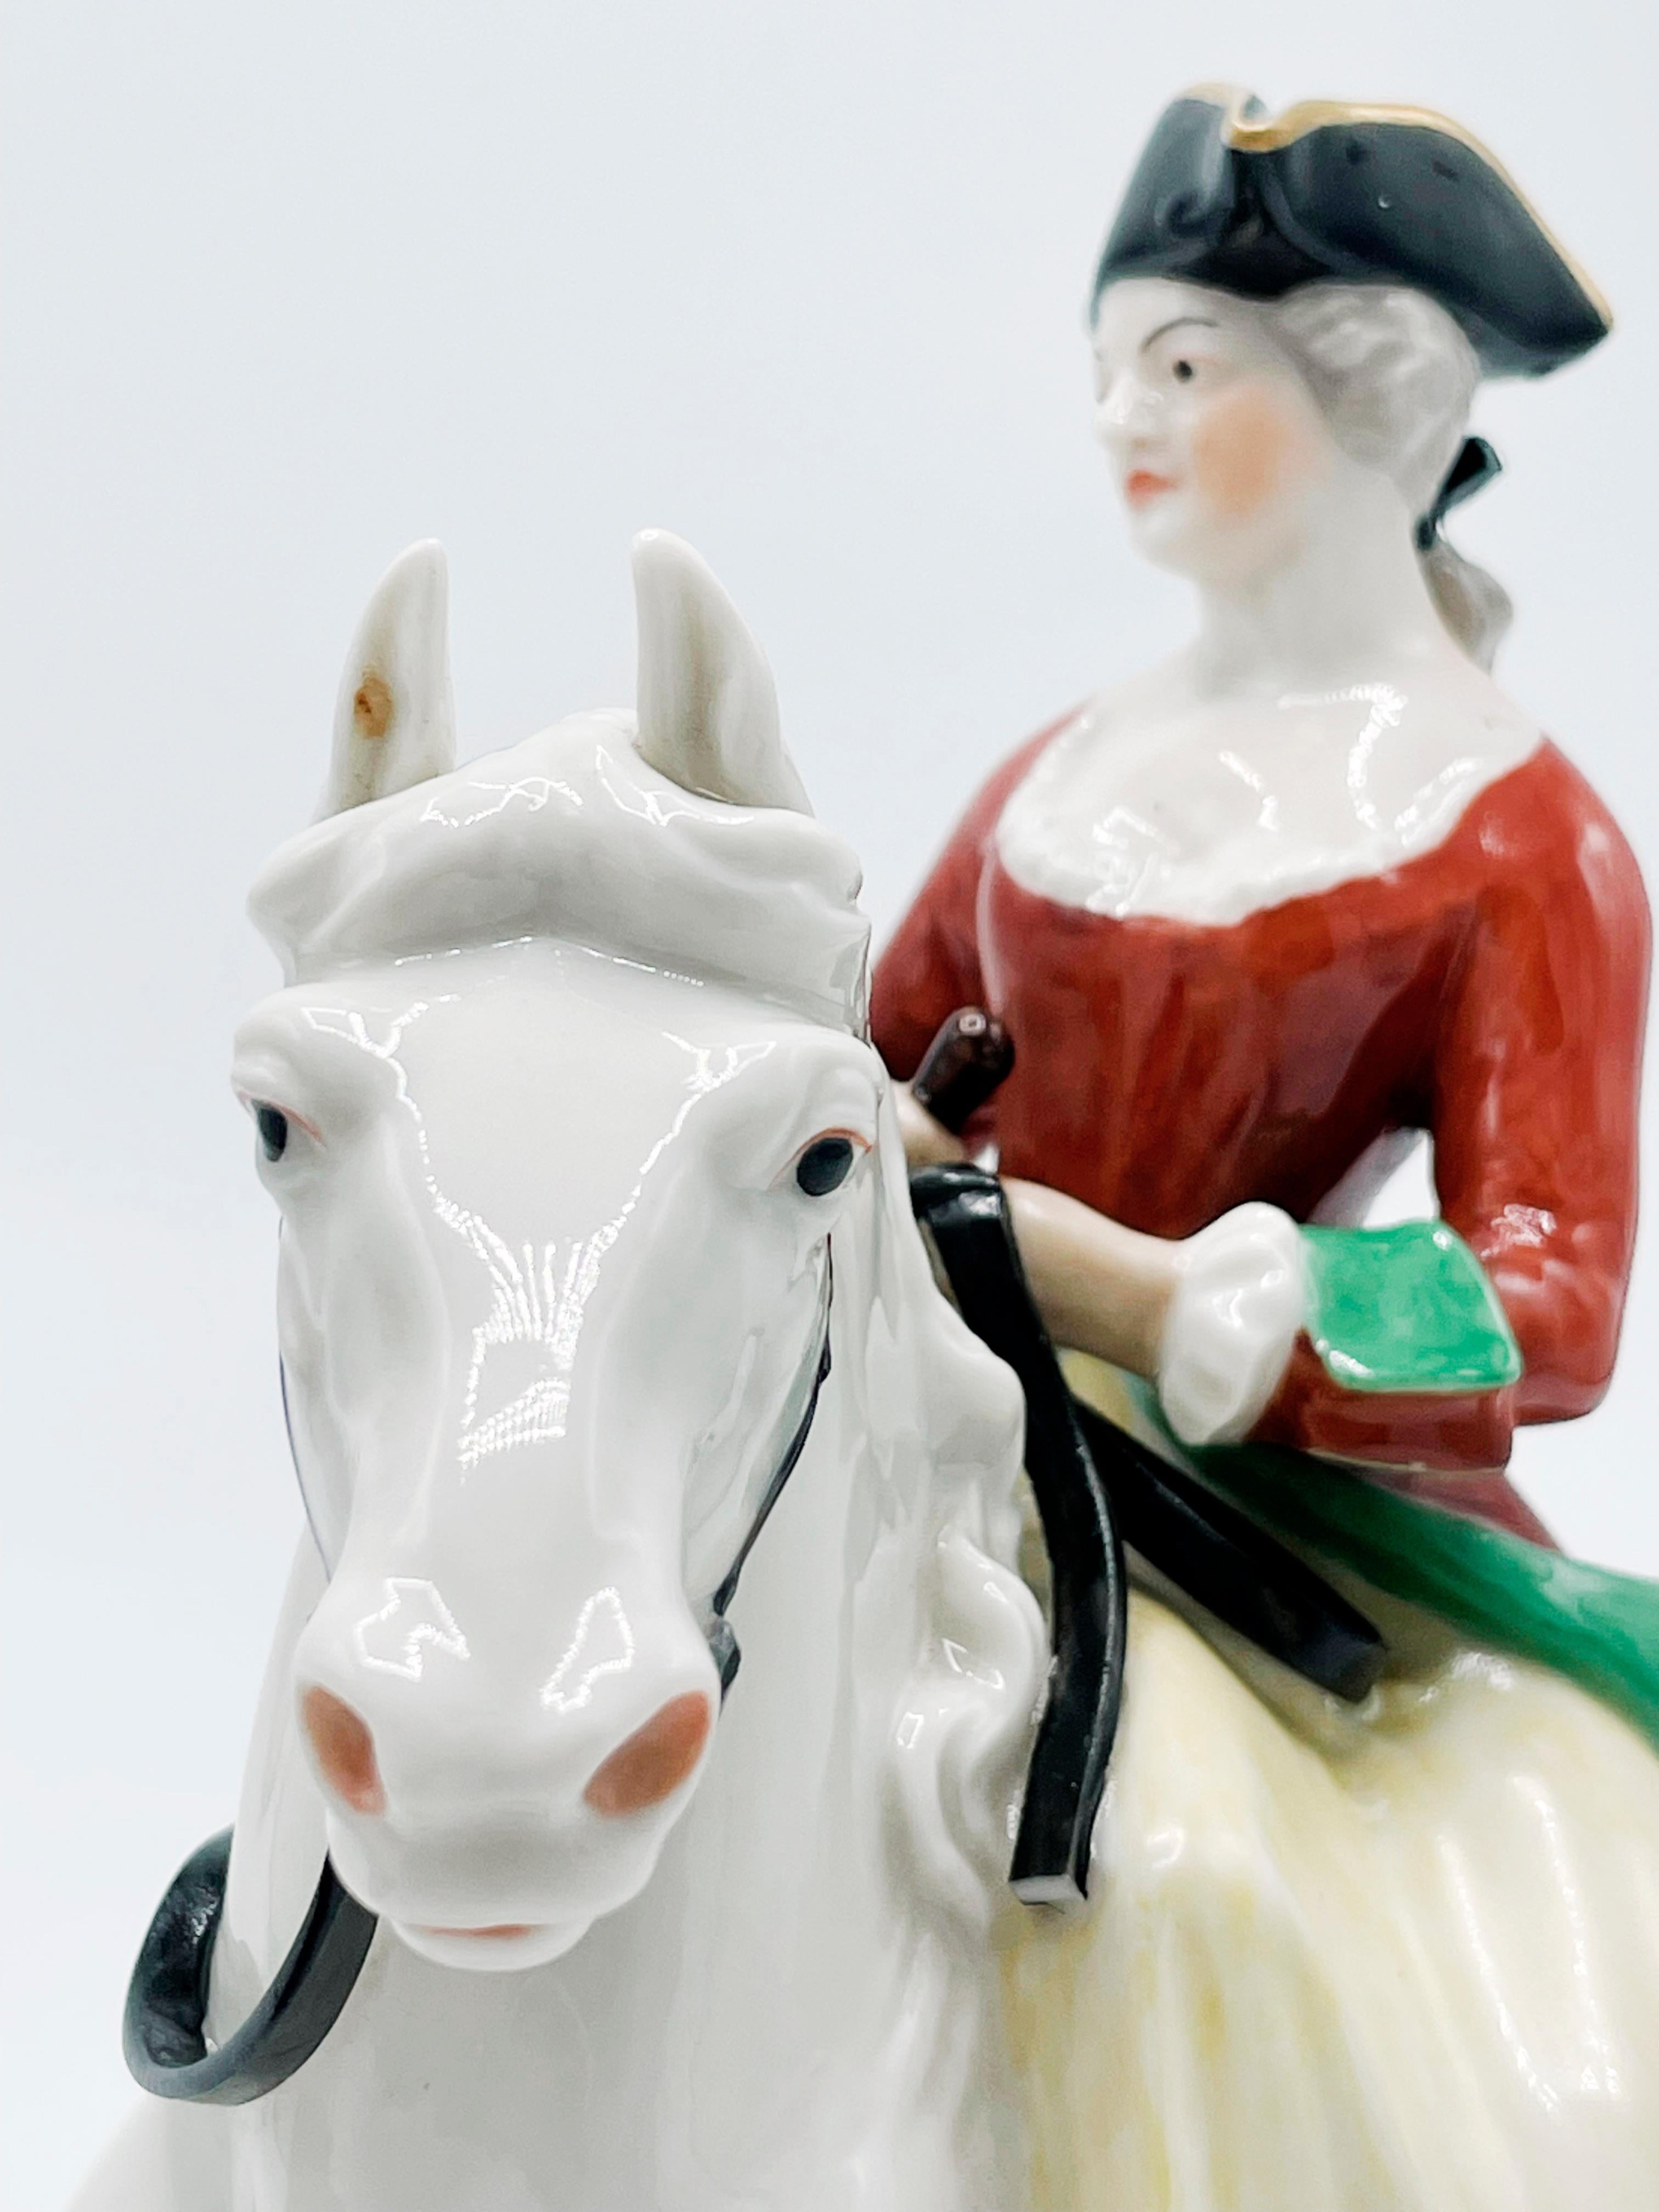 German Theodor Kärner figure Hunting rider pincess MARGARETHE V. Thurn and Taxis. For Sale